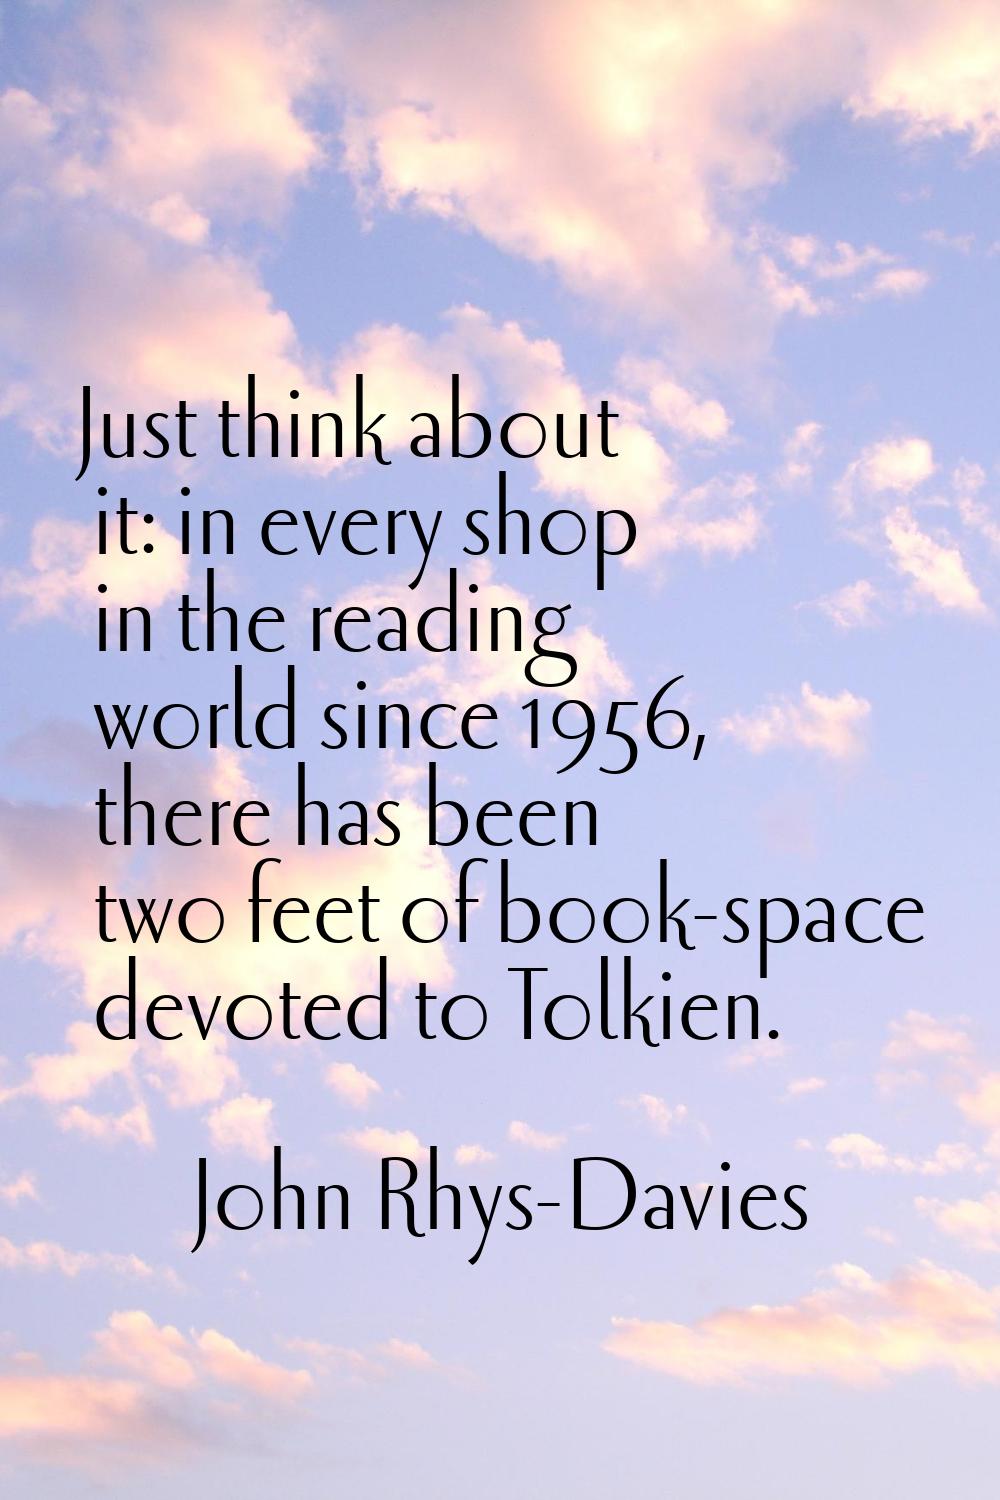 Just think about it: in every shop in the reading world since 1956, there has been two feet of book